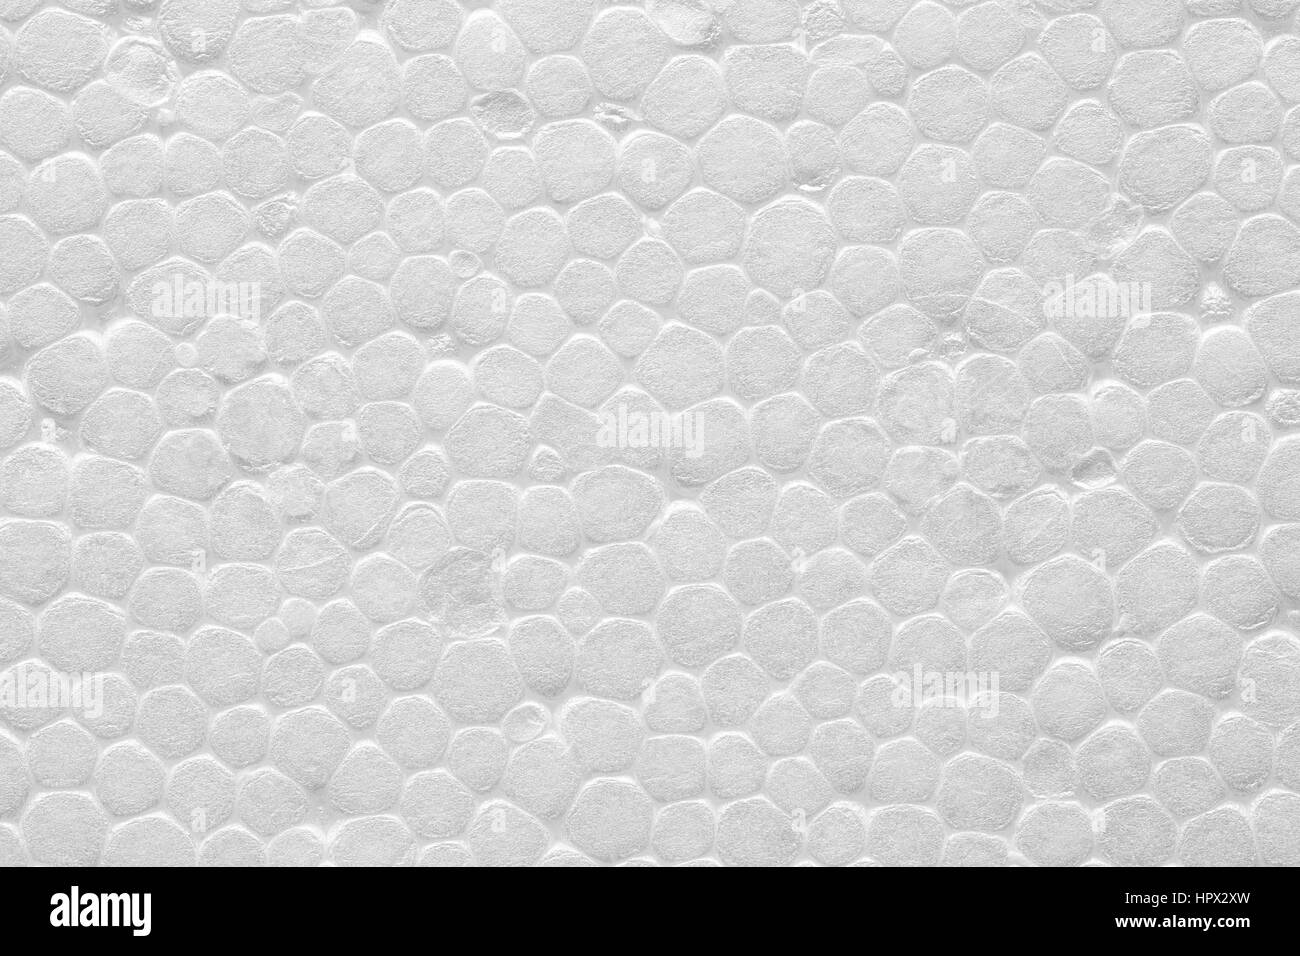 High quality close up picture of white polystyrene foam, styrofoam texture background. Stock Photo